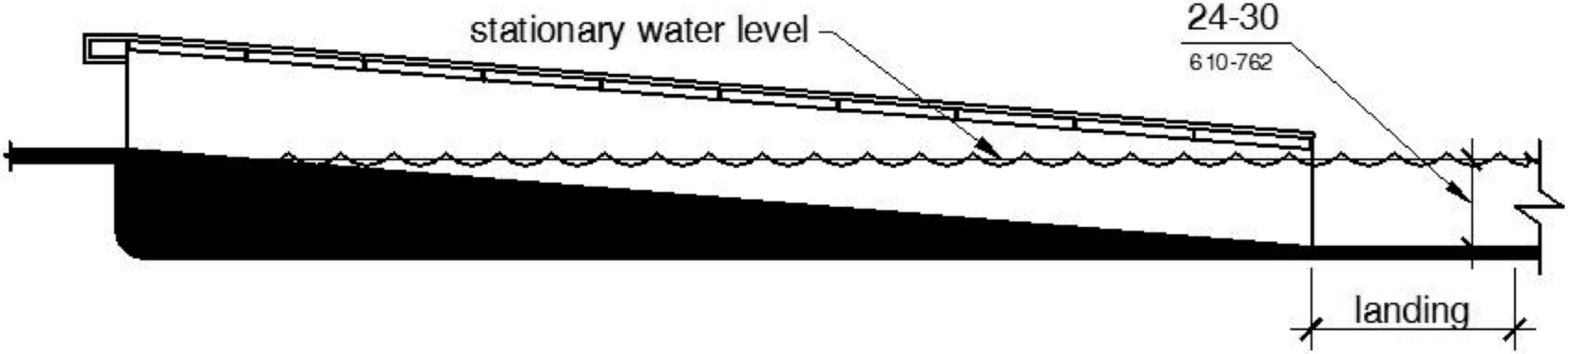 An elevation drawing shows a sloped entry with a submerged depth of 24 to 30 inches below the stationary water level at the landing.